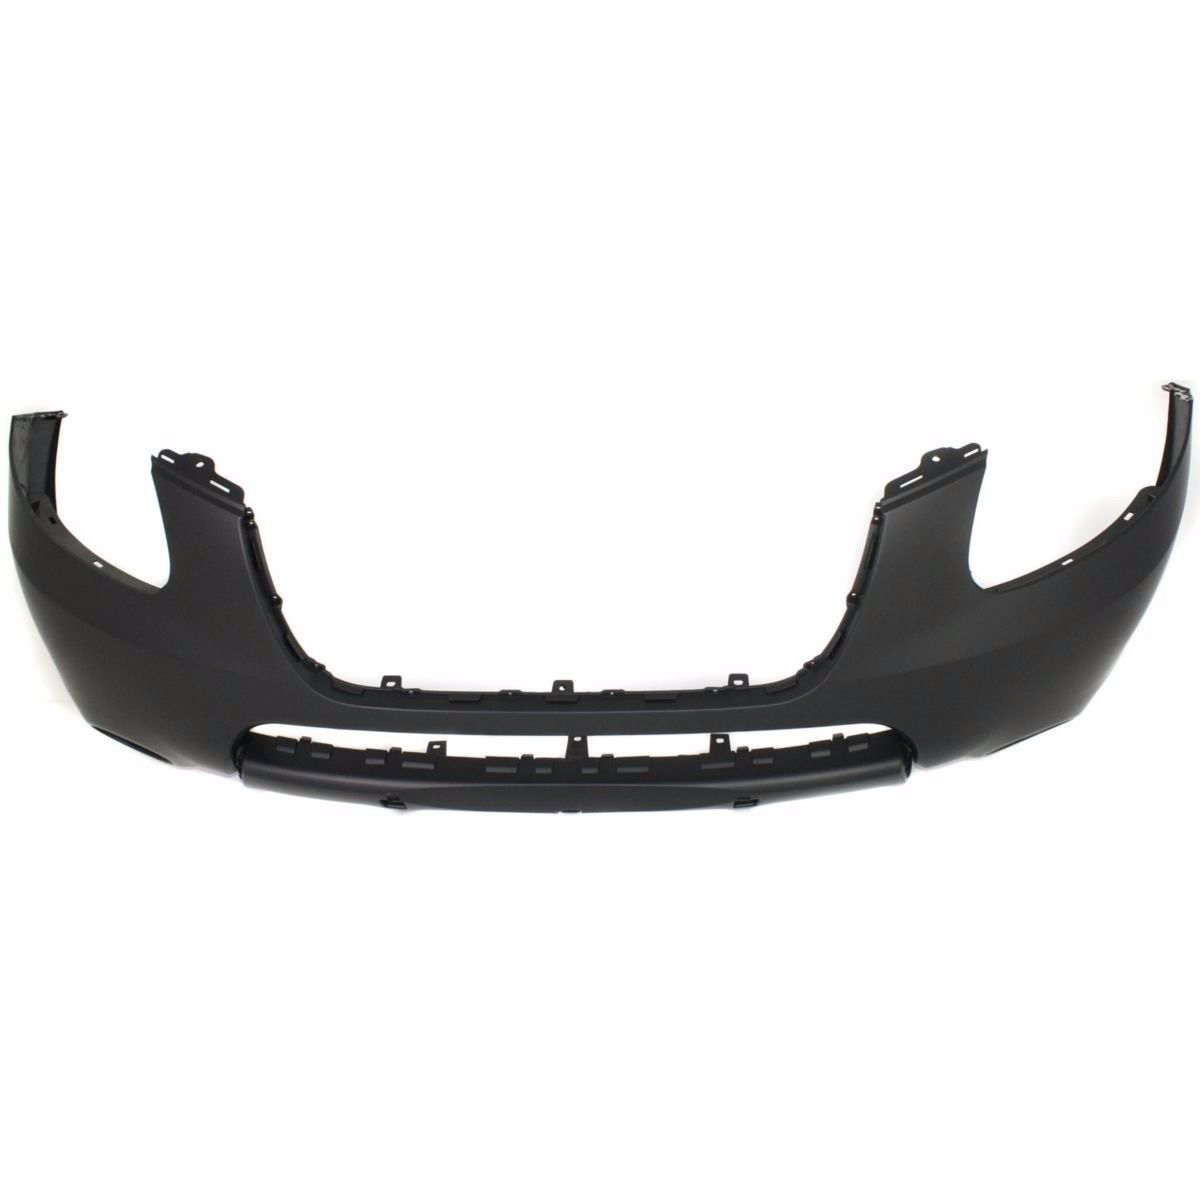 2007-2009 HYUNDAI SANTA FE Front Bumper Cover w/two tone paint Painted to Match